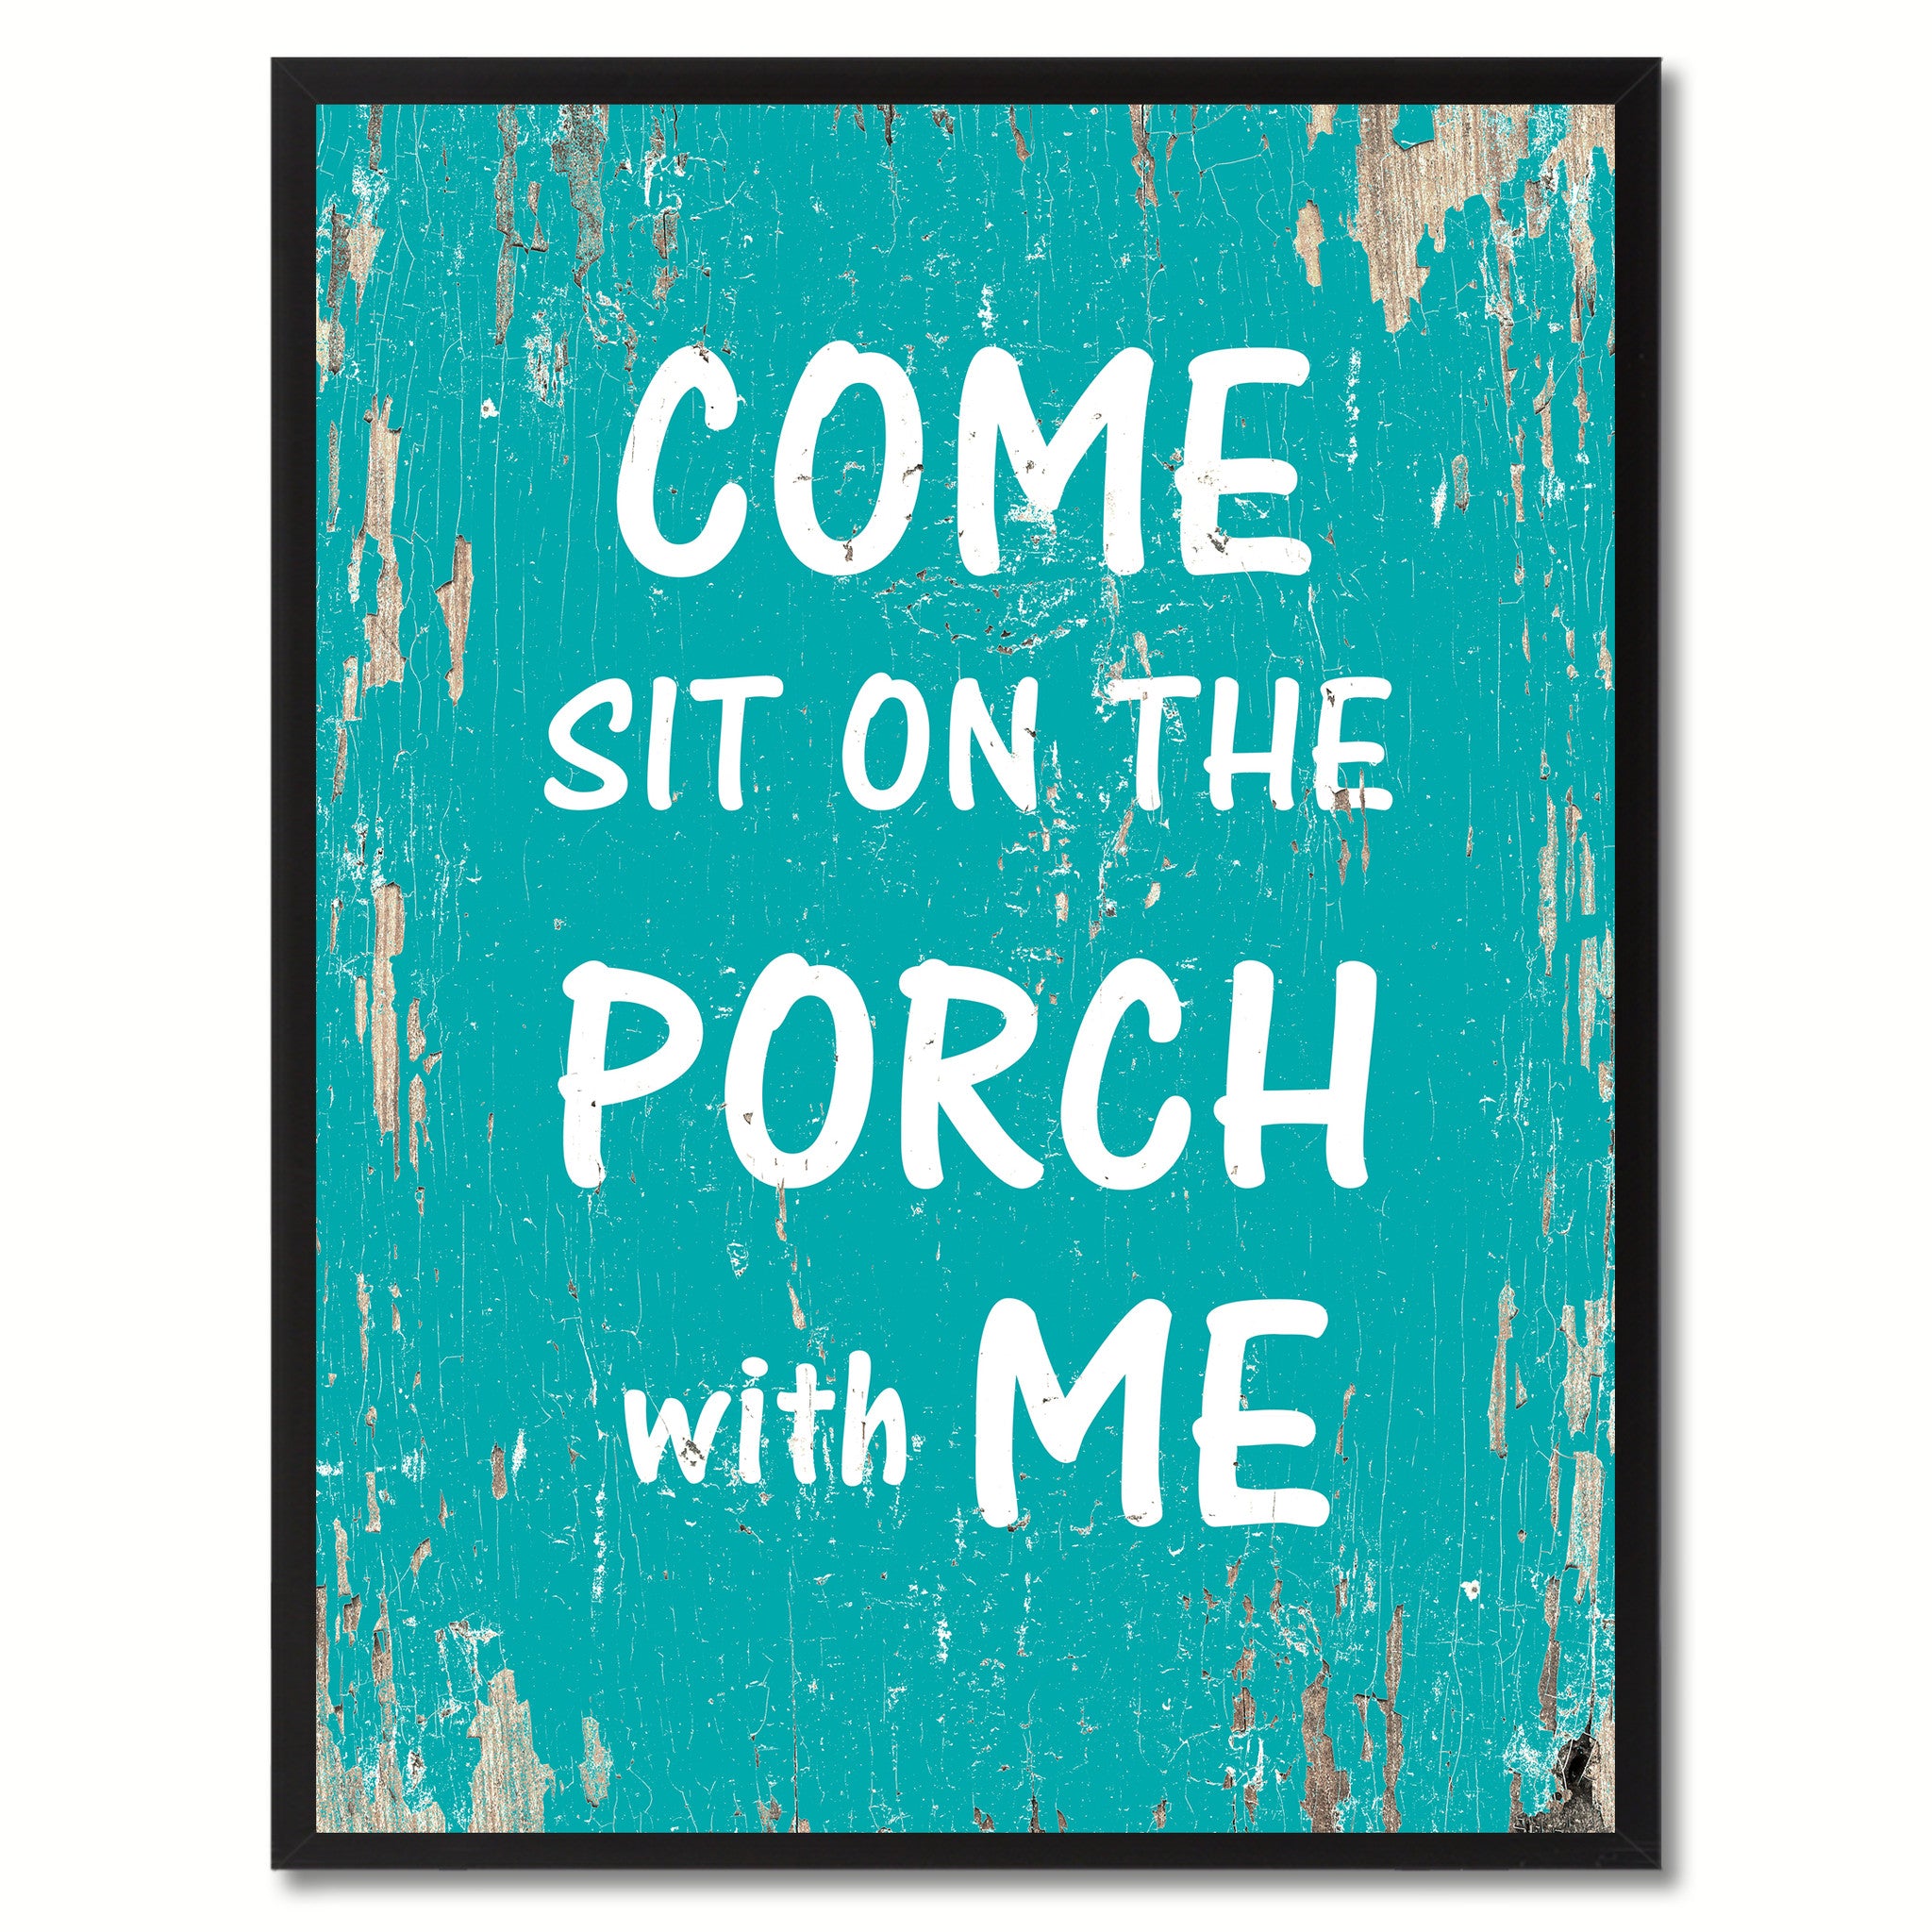 Come Sit On The Porch With Me Saying Canvas Print, Black Picture Frame Home Decor Wall Art Gifts